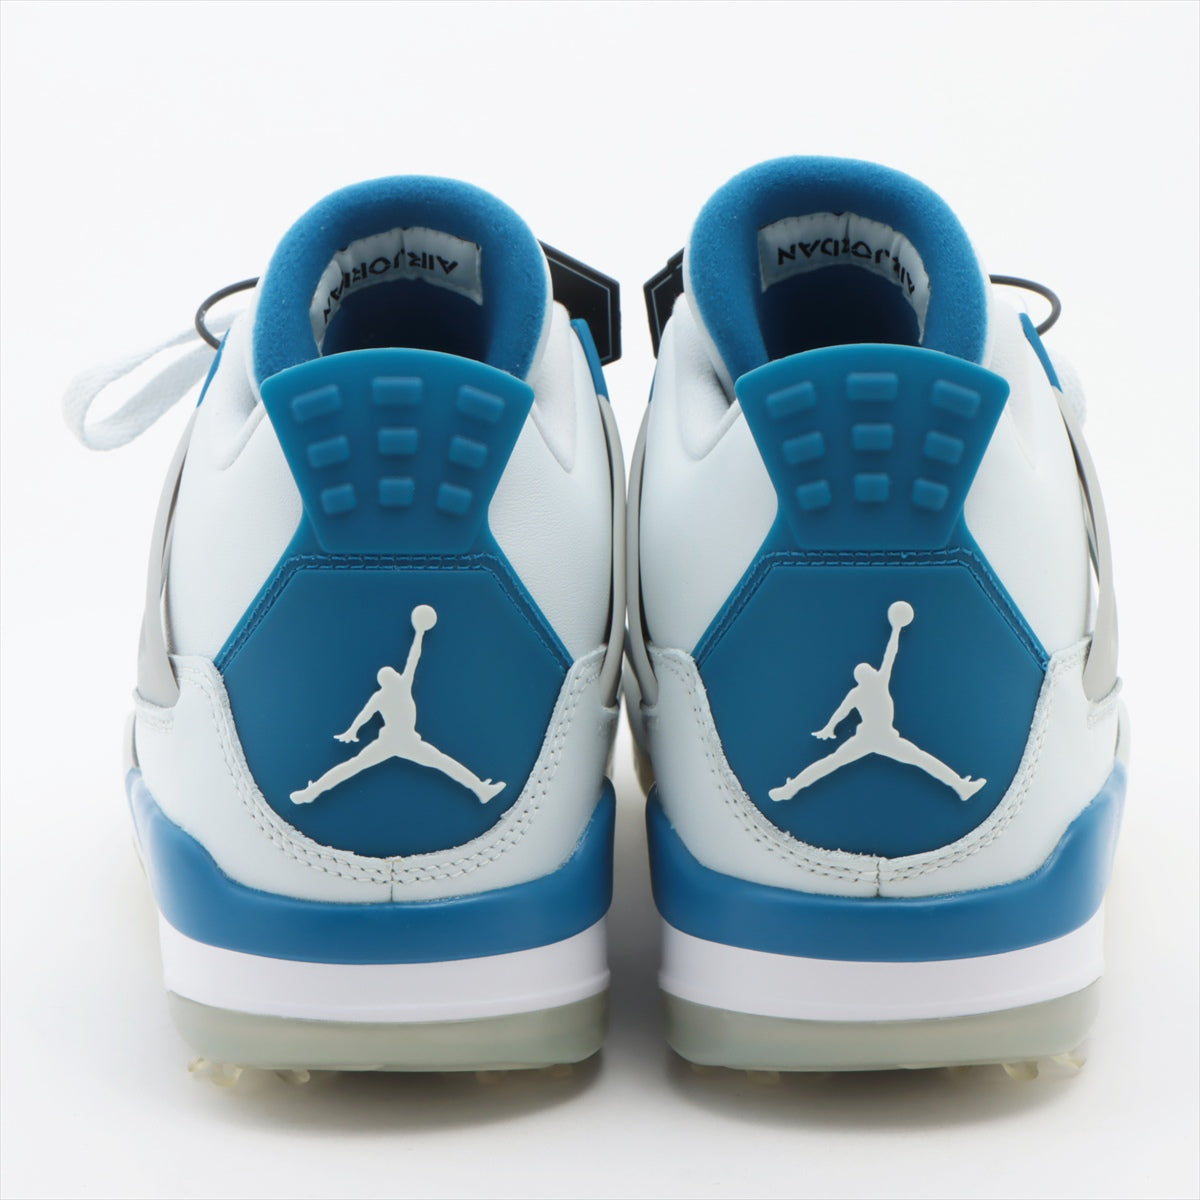 Nike Leather Sneakers 28㎝ Men's Blue x white CU9981-101 AIR JORDAN 4 GOLF MILITARY BLUE There is a box